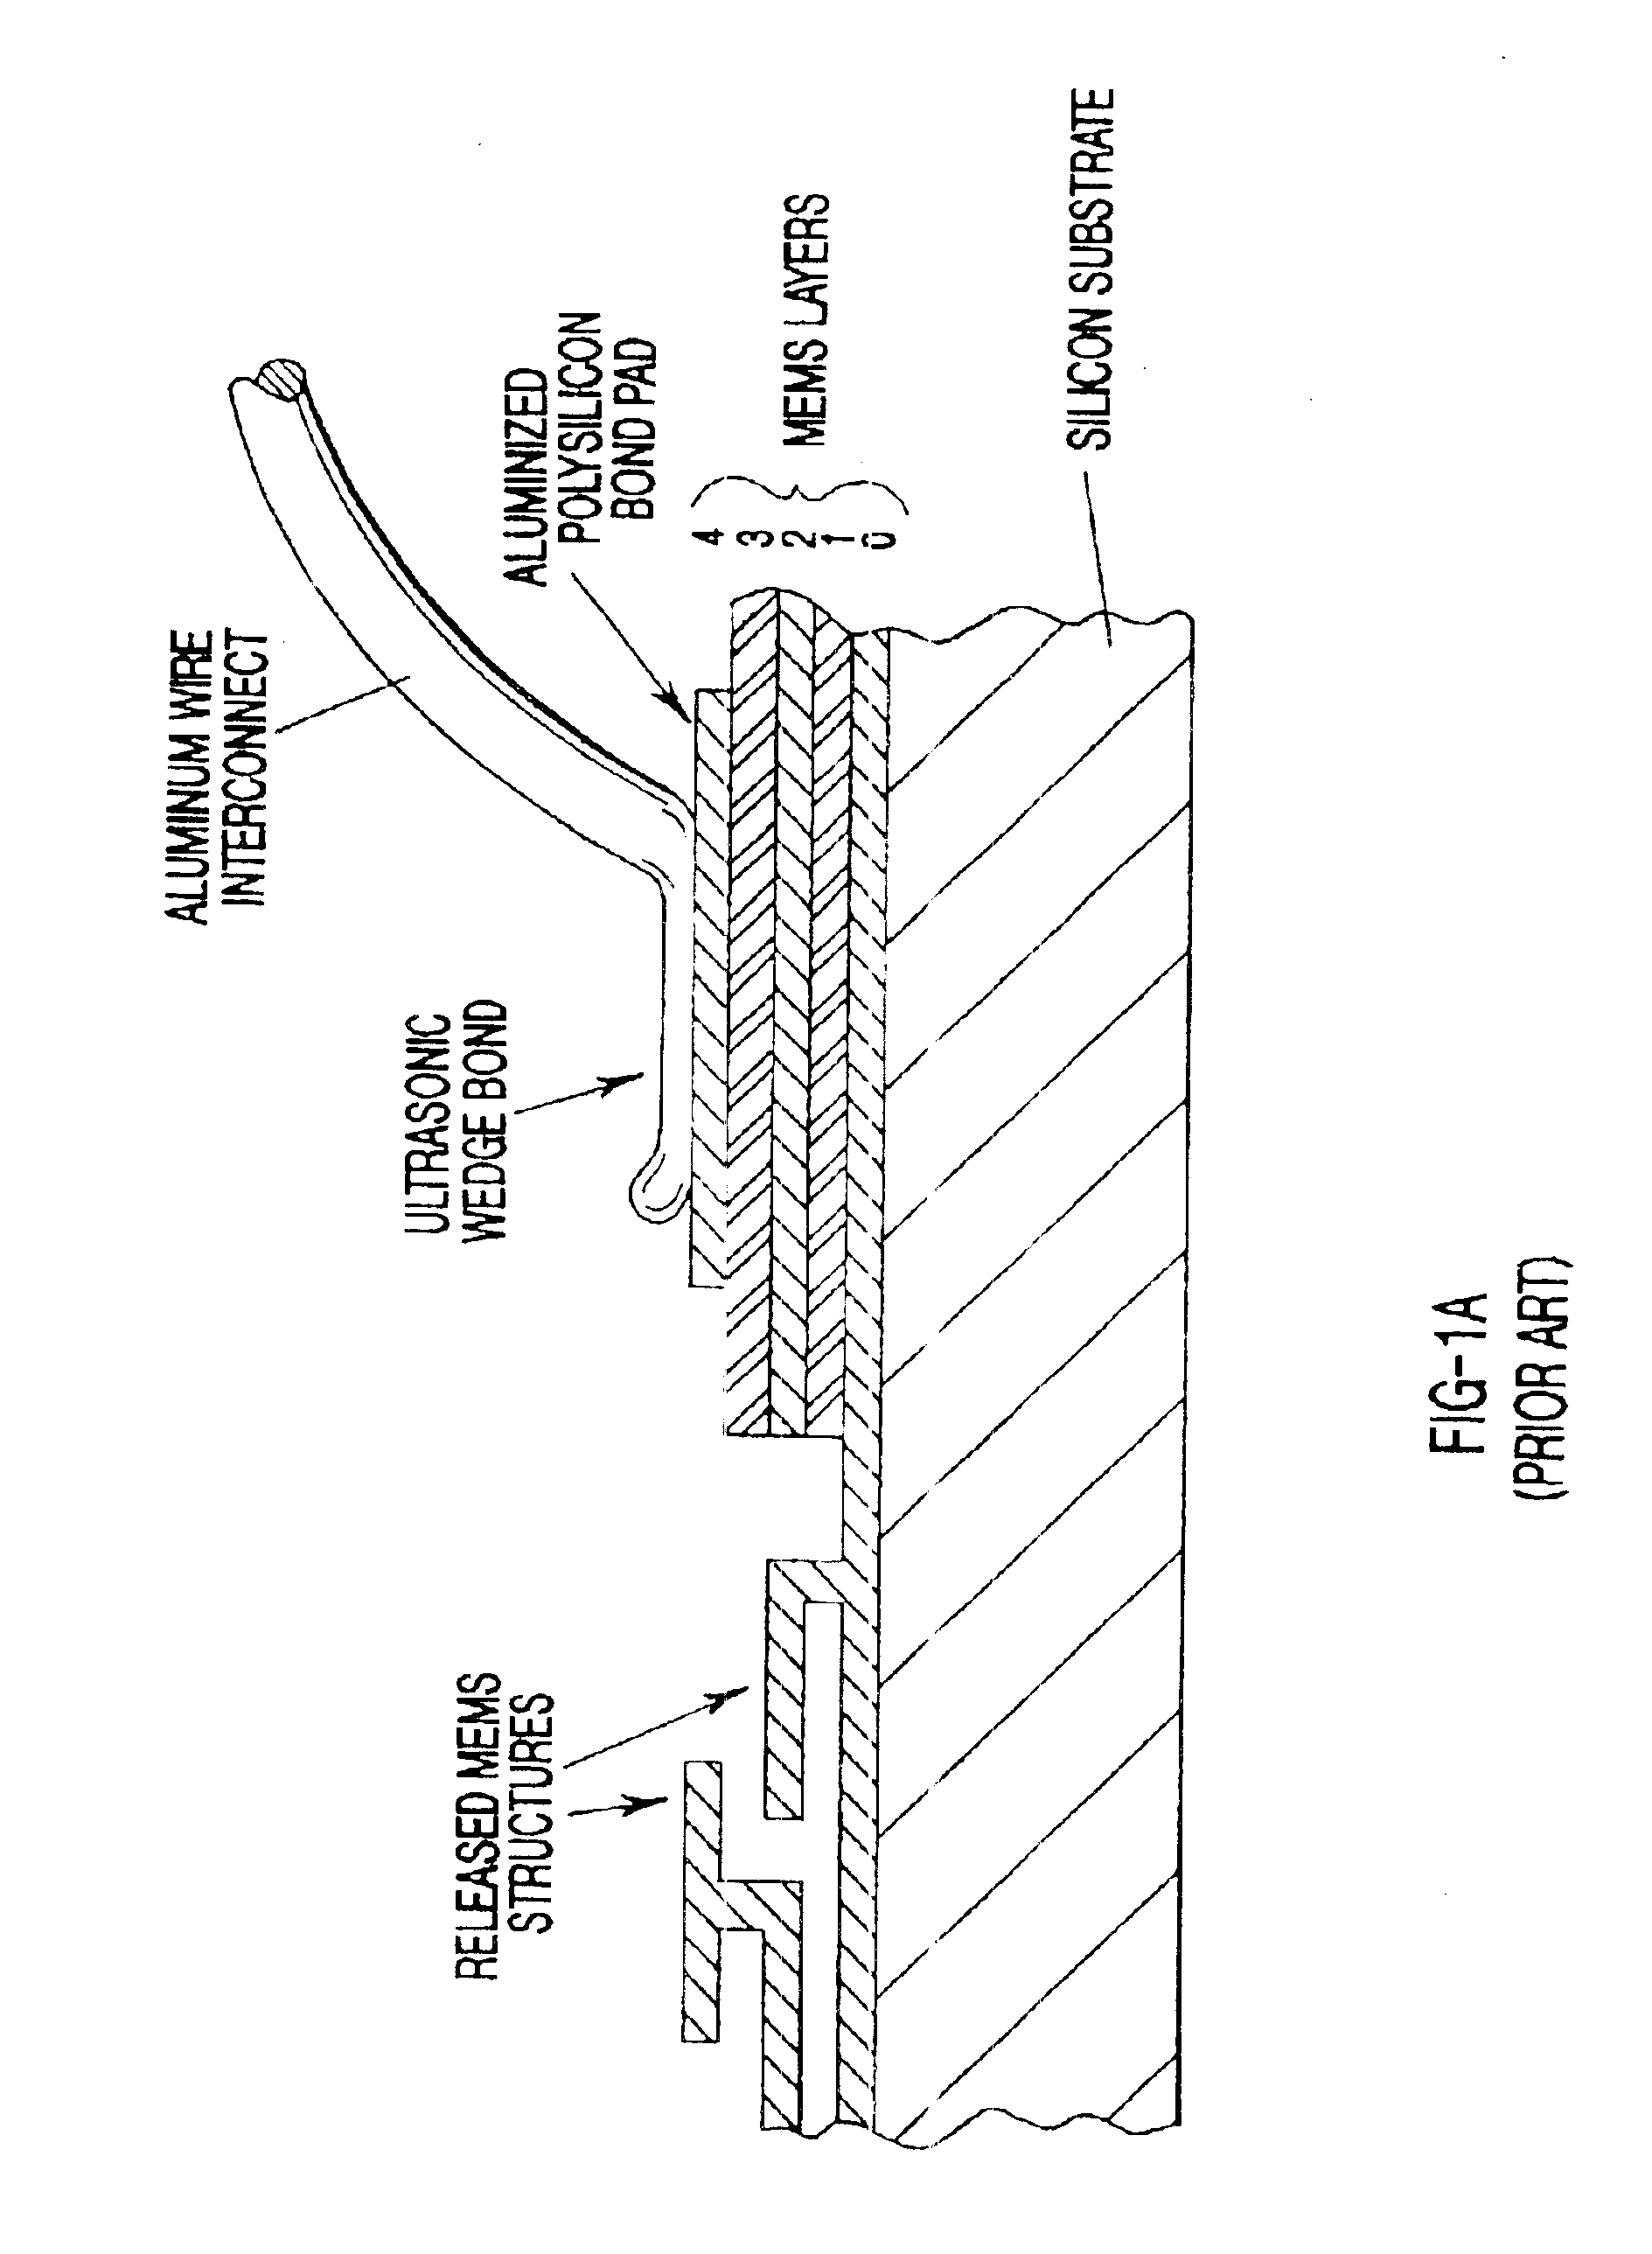 Release resistant electrical interconnections for MEMS devices